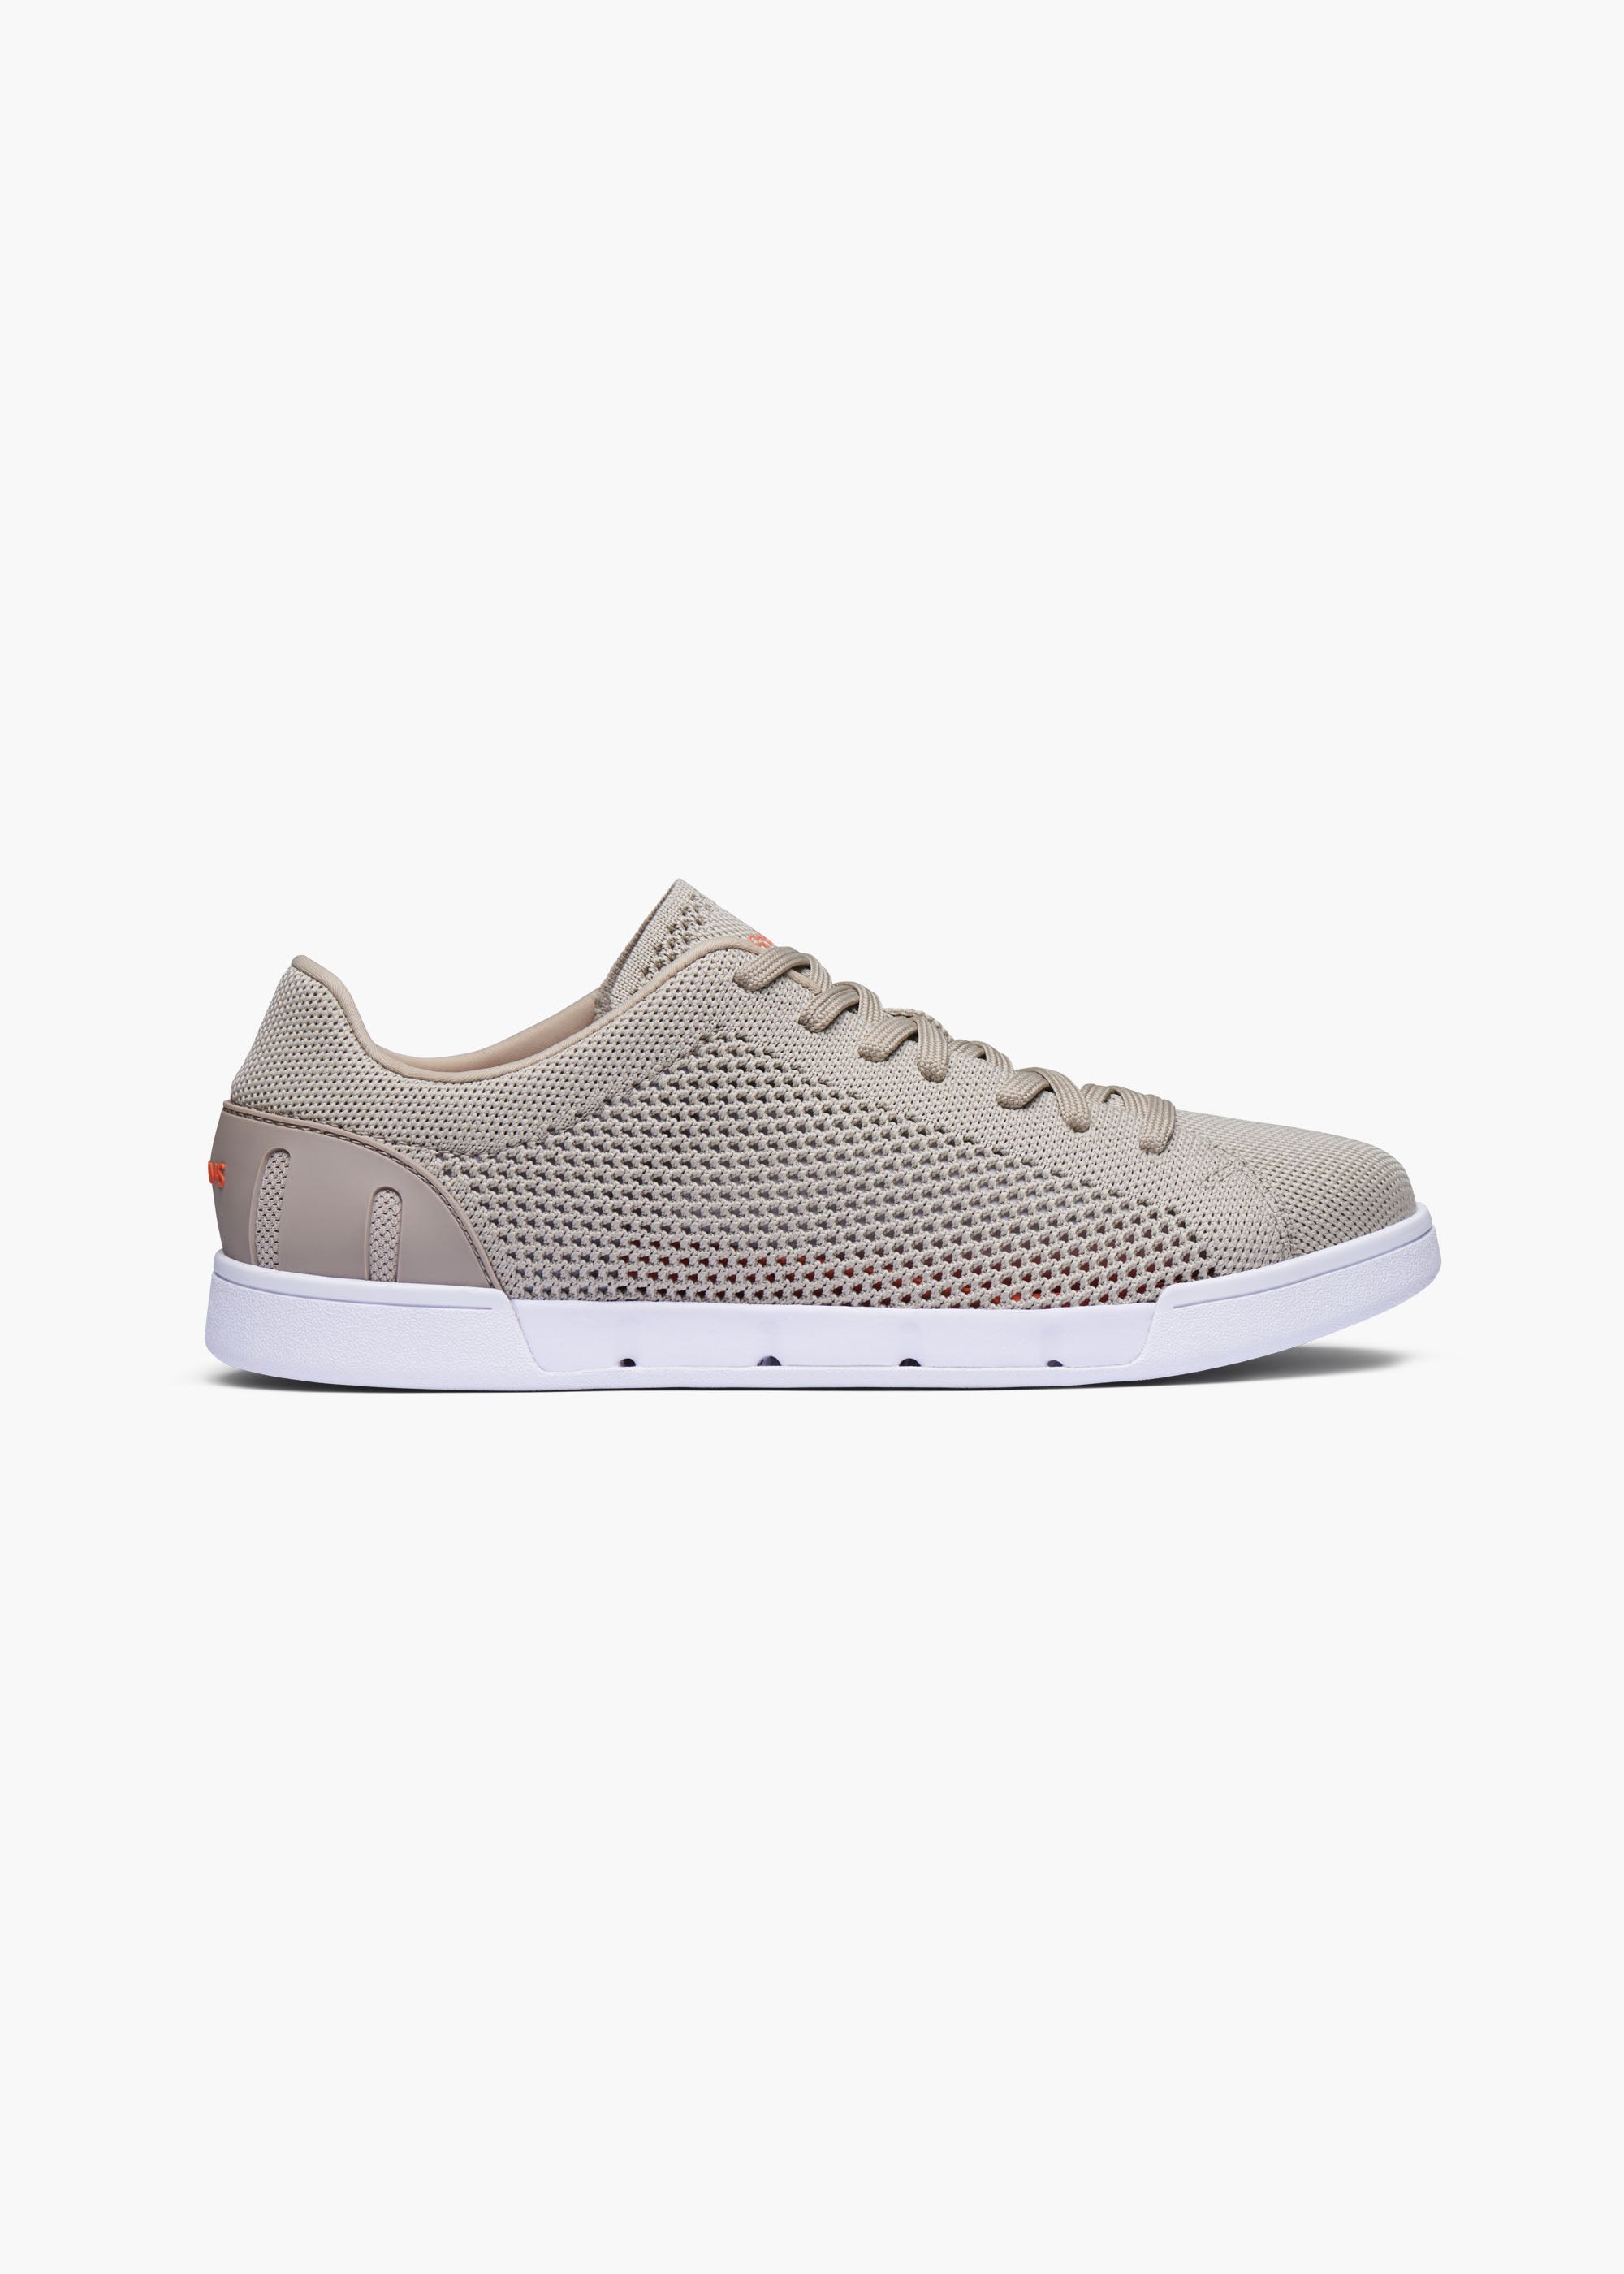 Breeze Tennis Knit in Dune for Mens | SWIMS